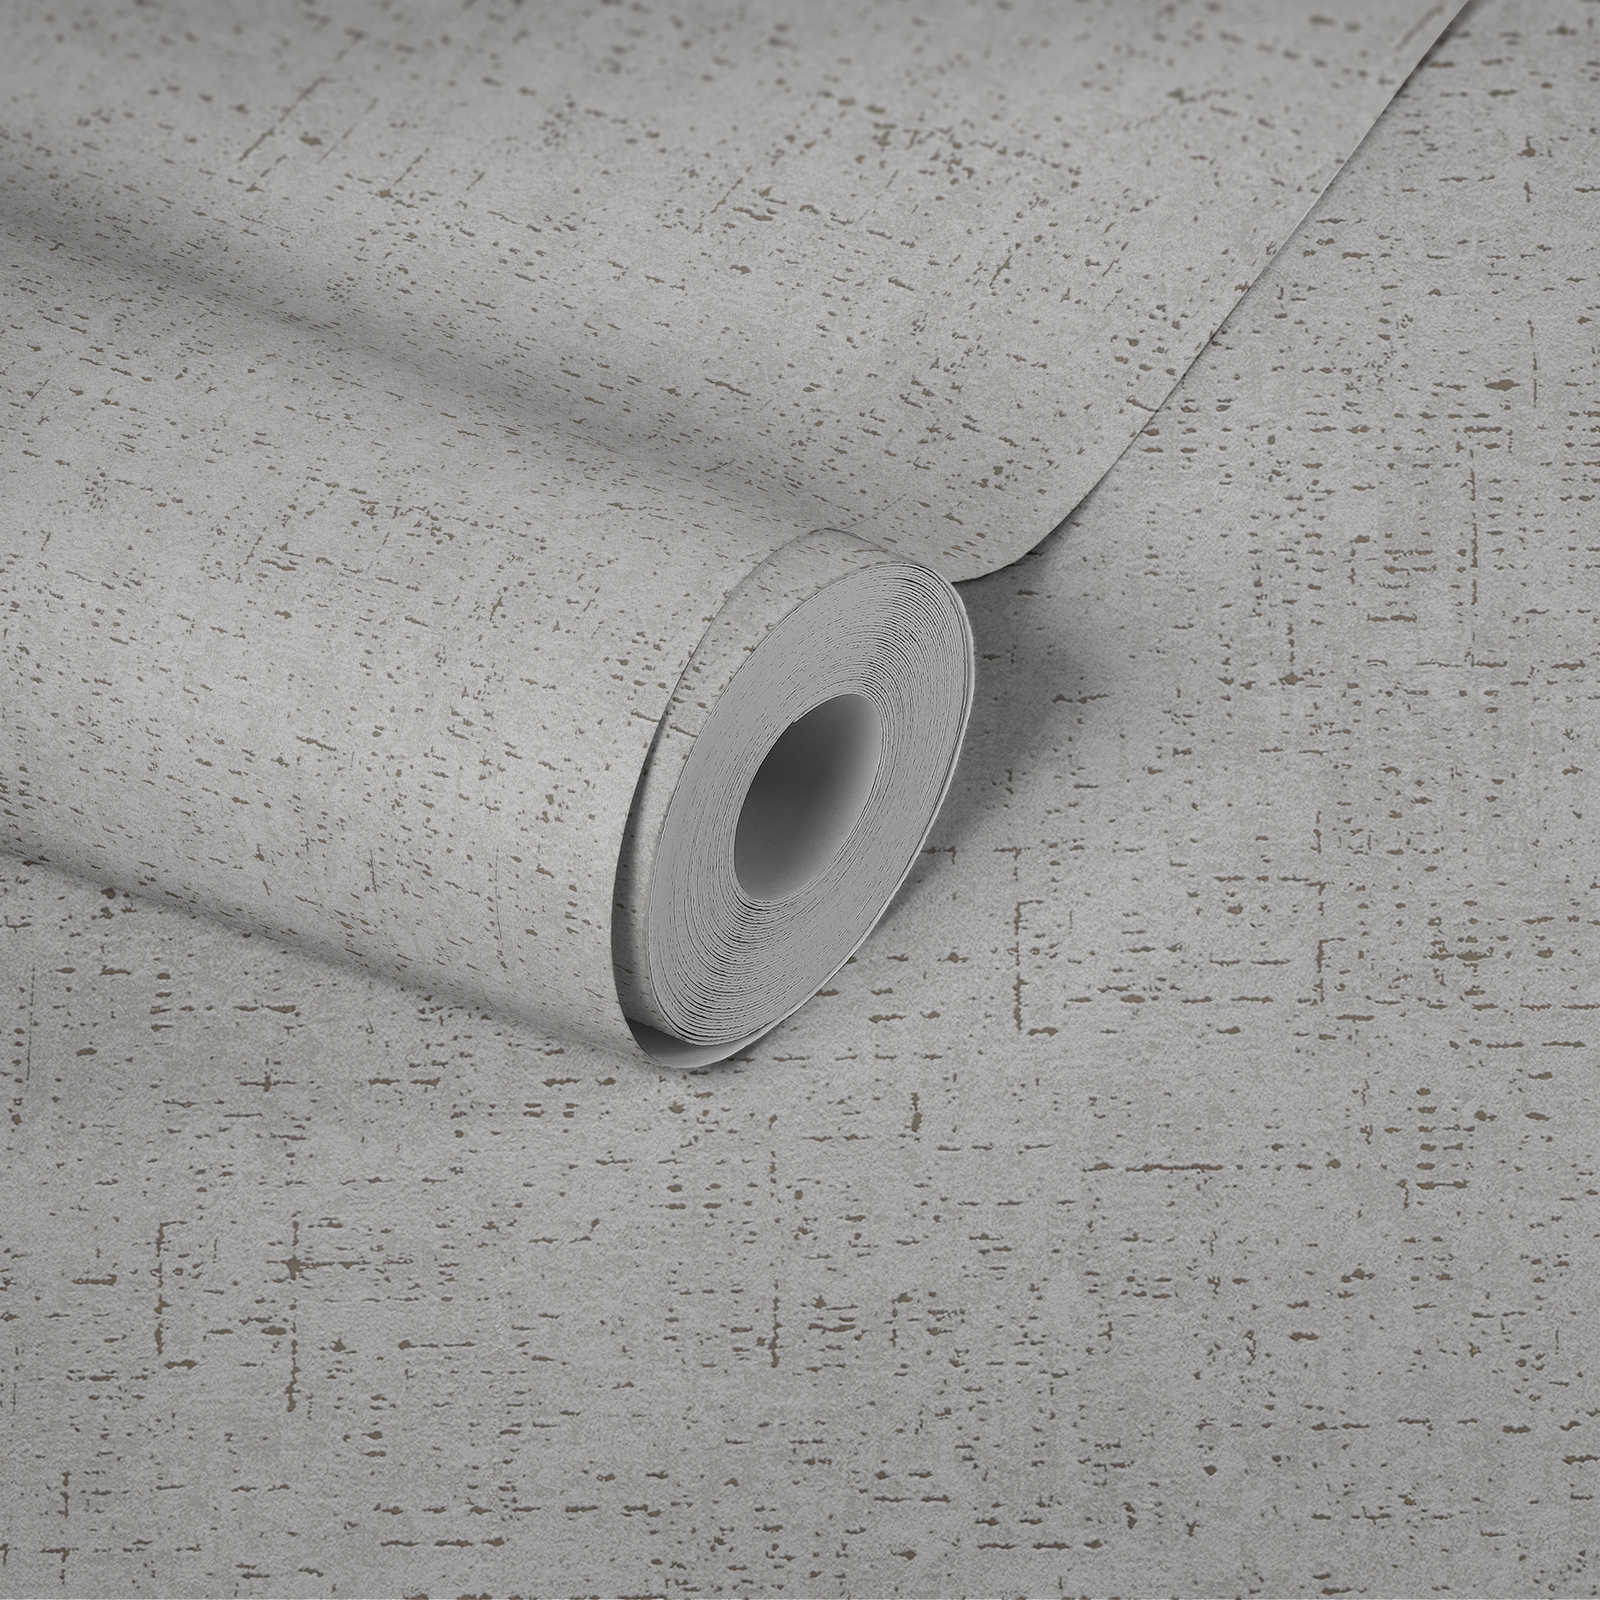             Plain wallpaper with texture pattern in plaster look - grey
        